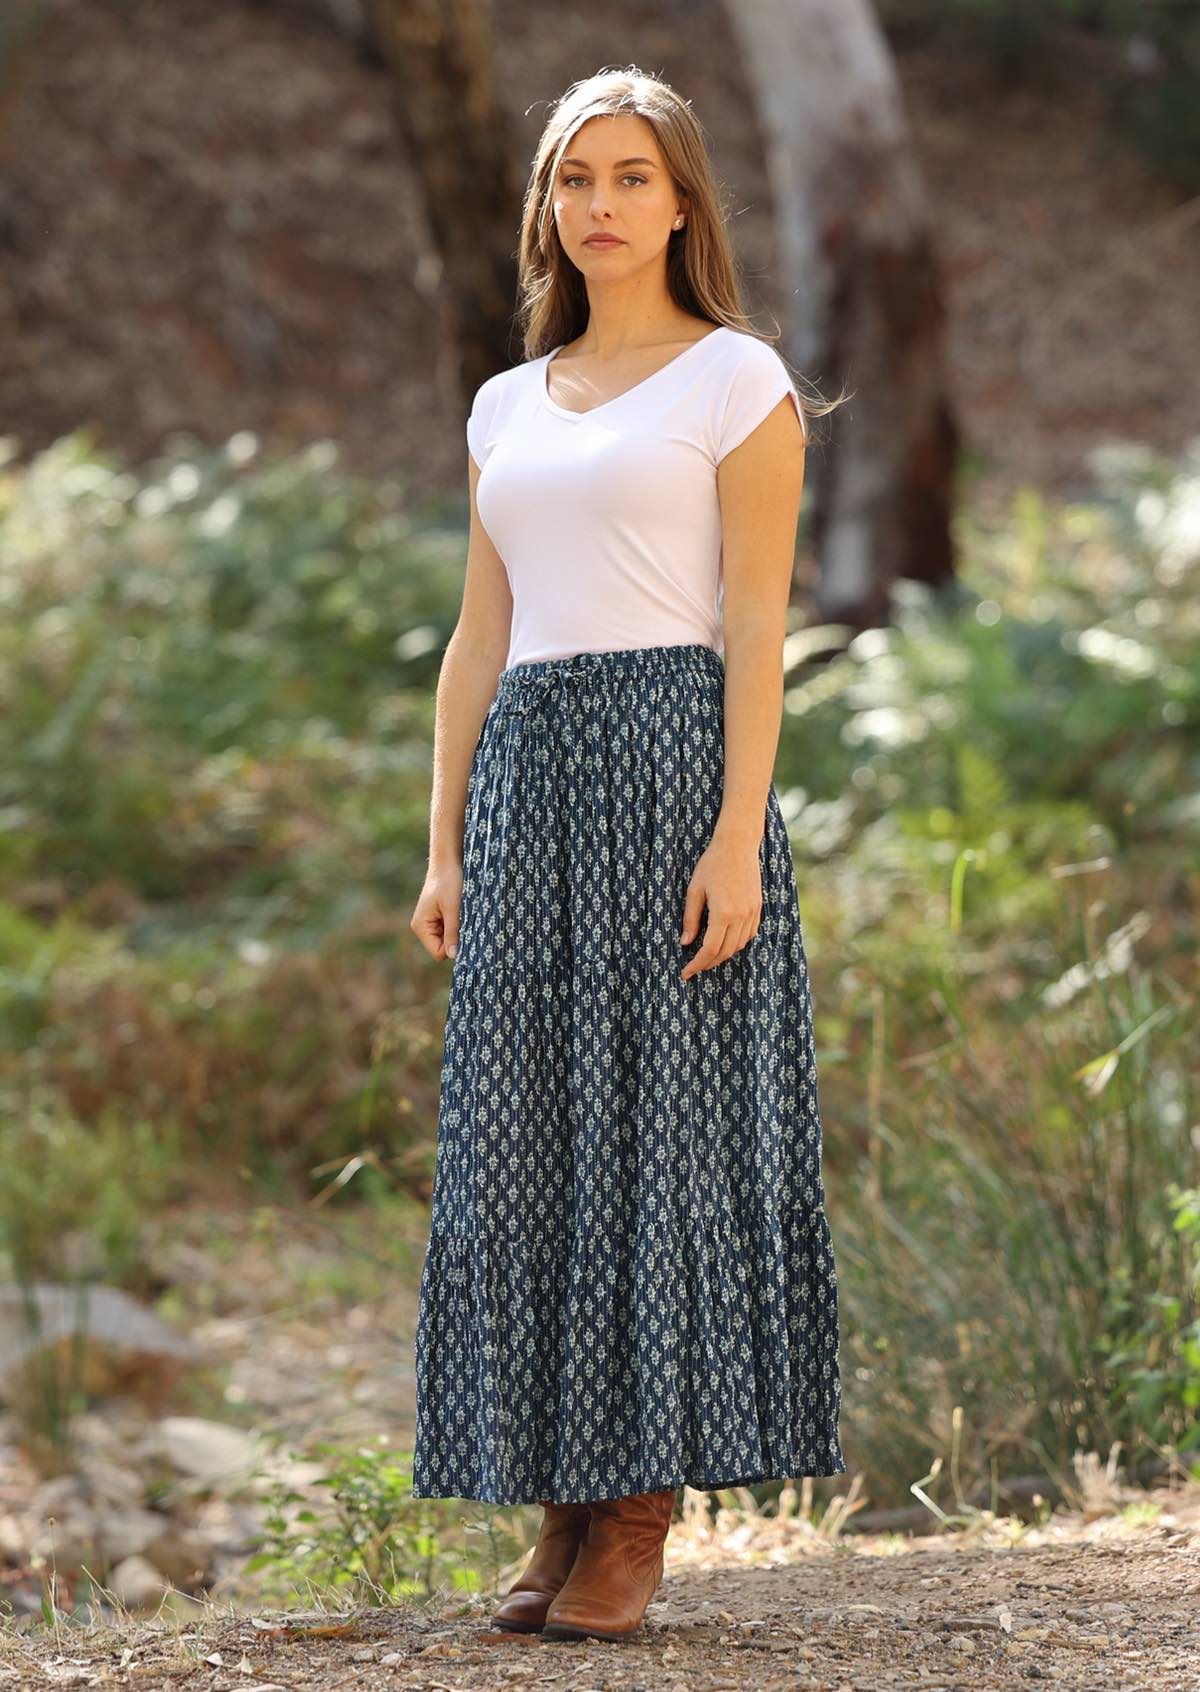 Blue floral maxi skirt is styled with a white top and brown boots. 